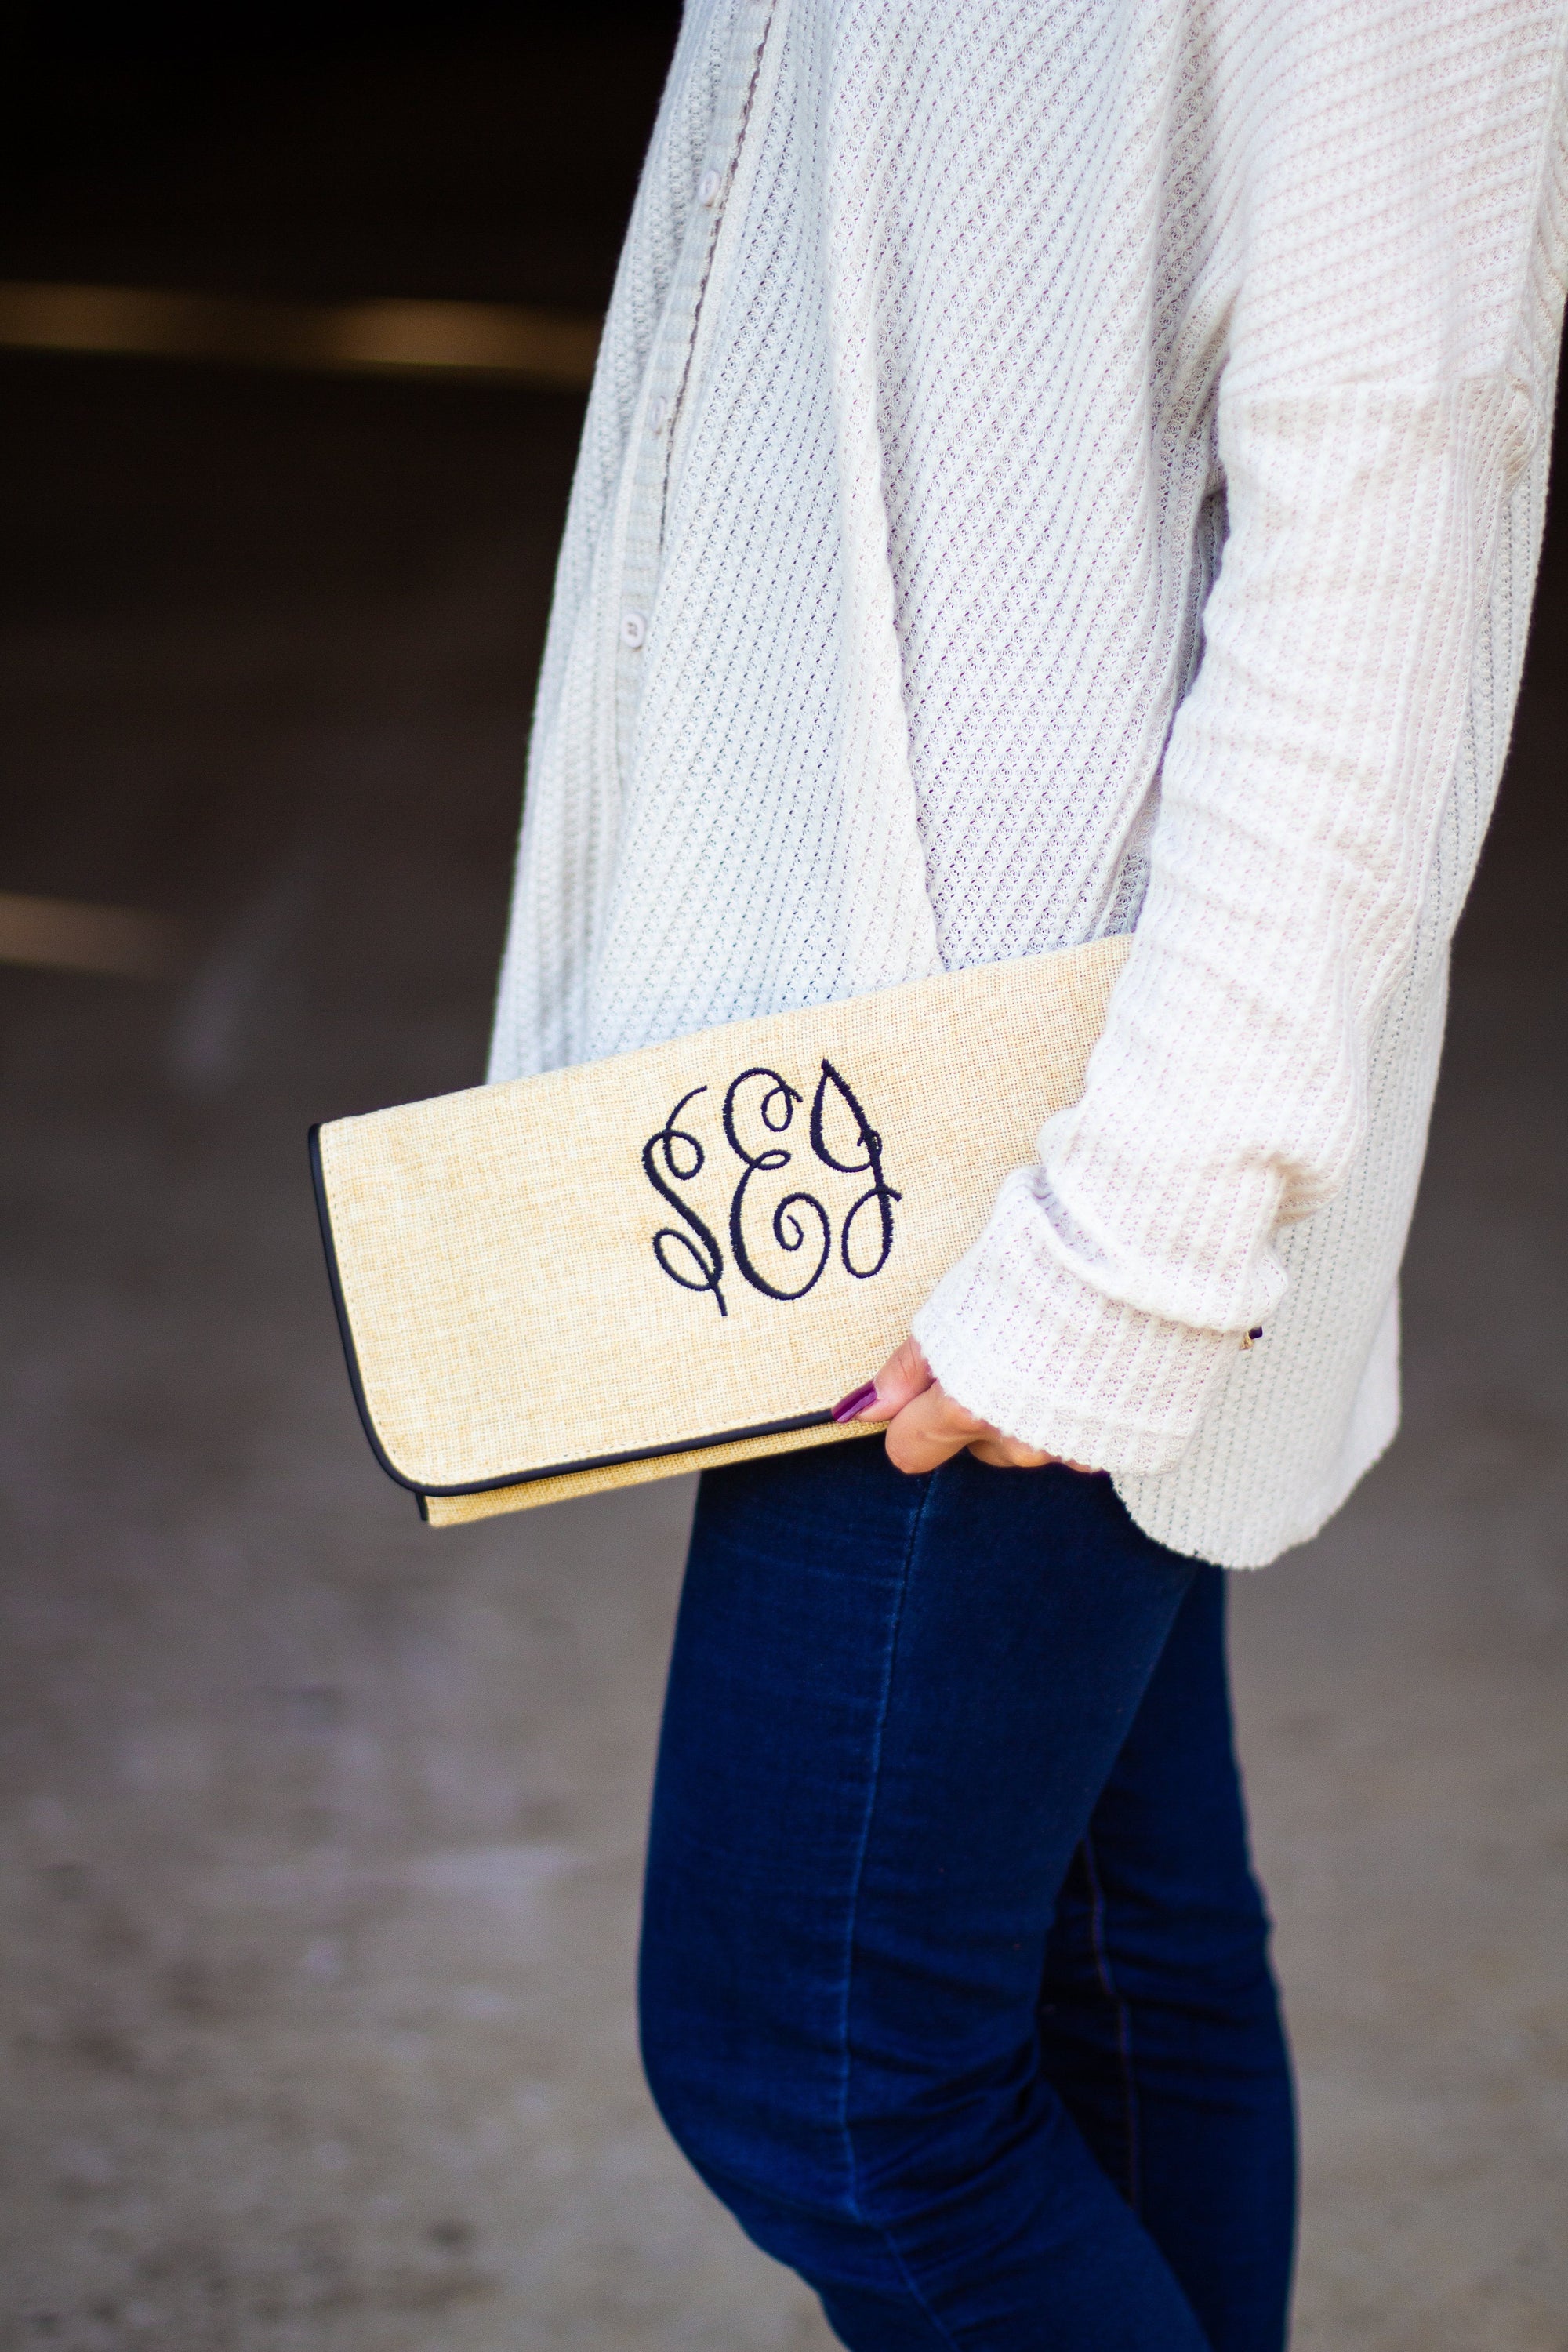 Classic Monogrammed Burlap Jute Wristlet Clutch, Accessories, SunnySouthern, - Sunny and Southern,